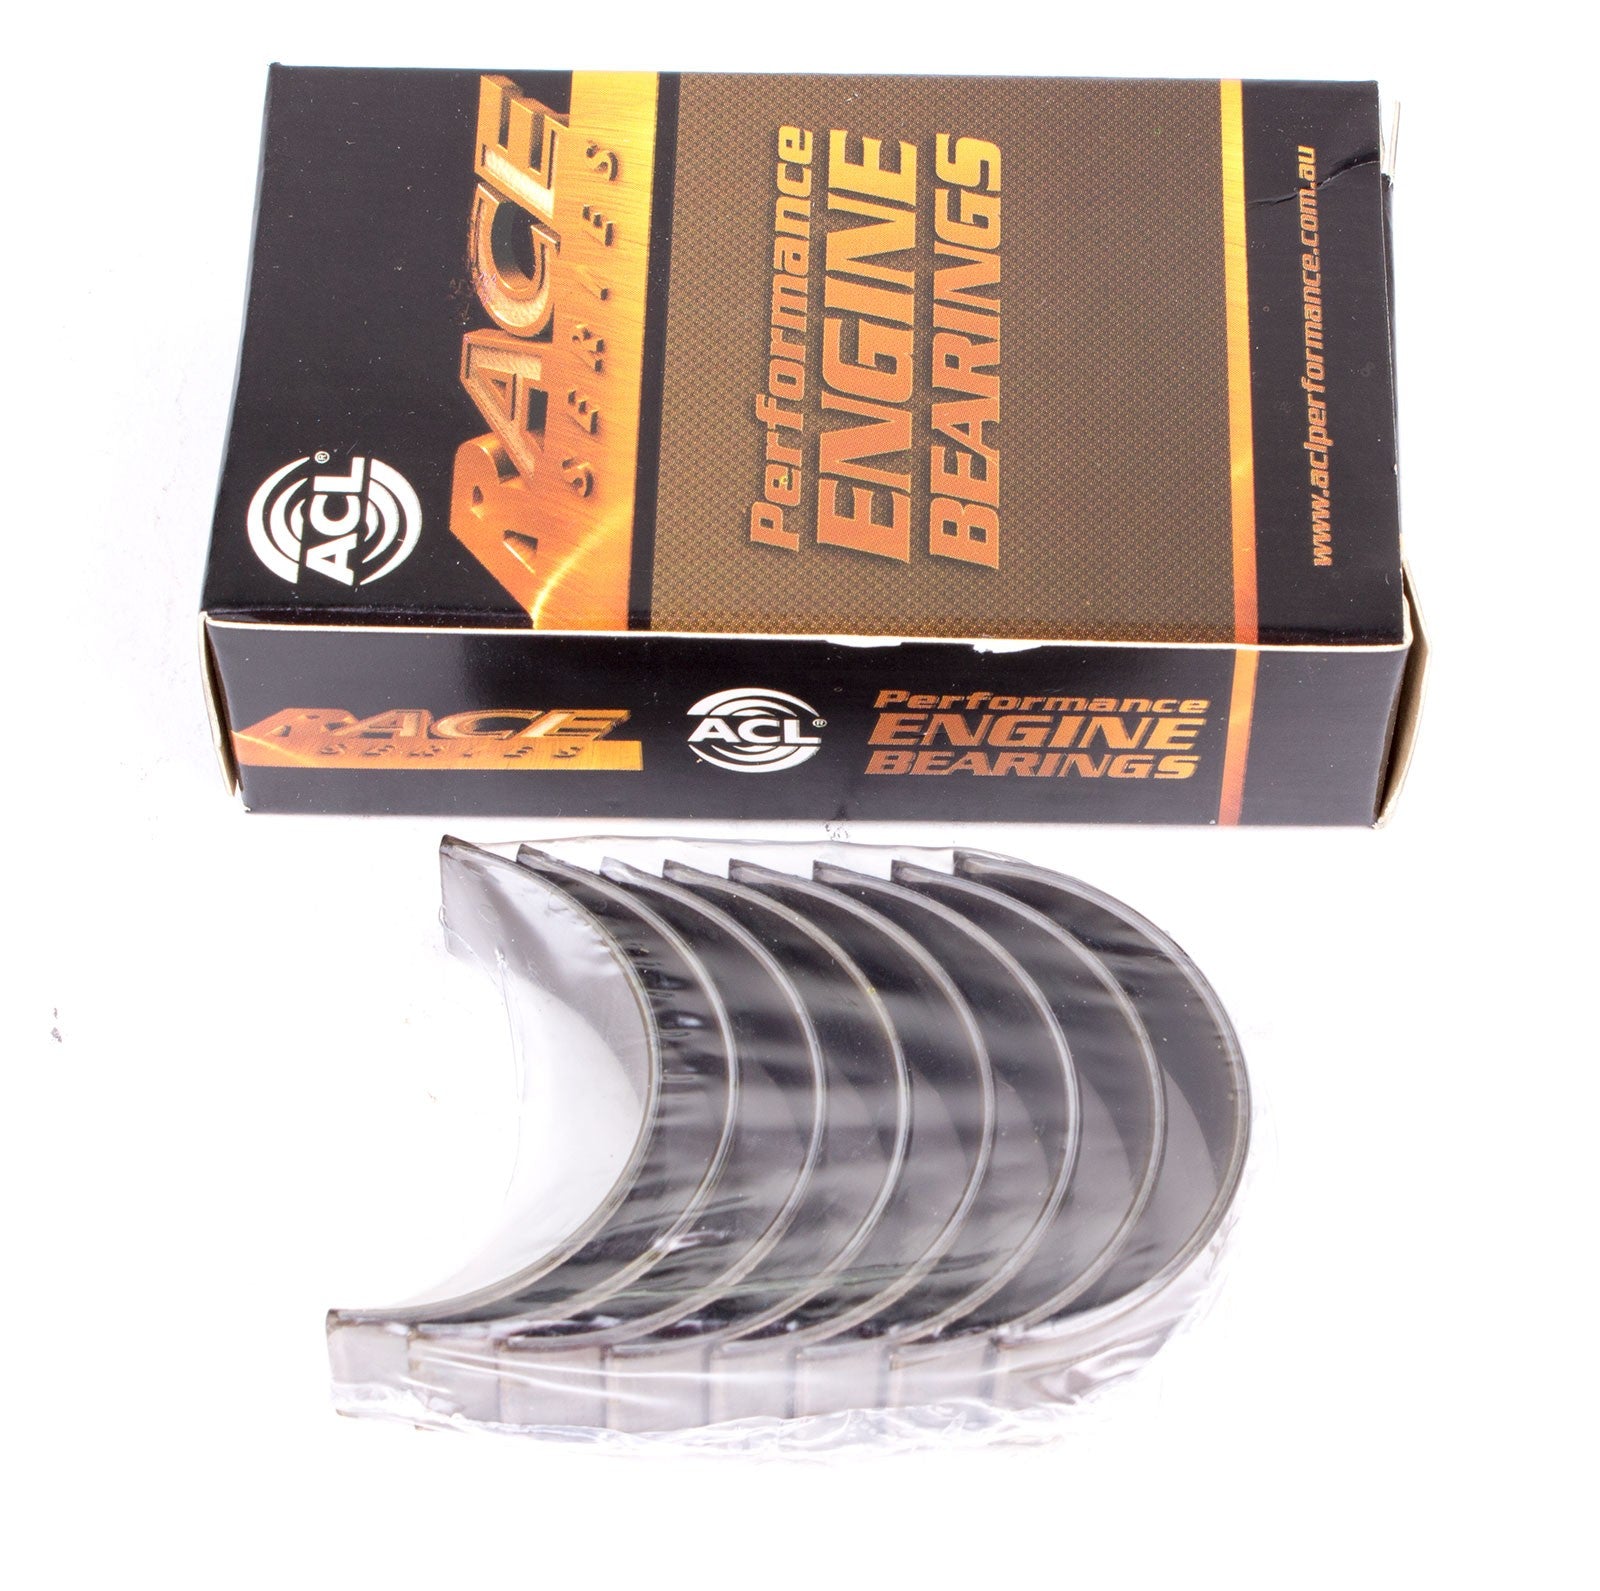 ACL 5M909H-09 Main bearing set (ACL Race Series) Photo-0 